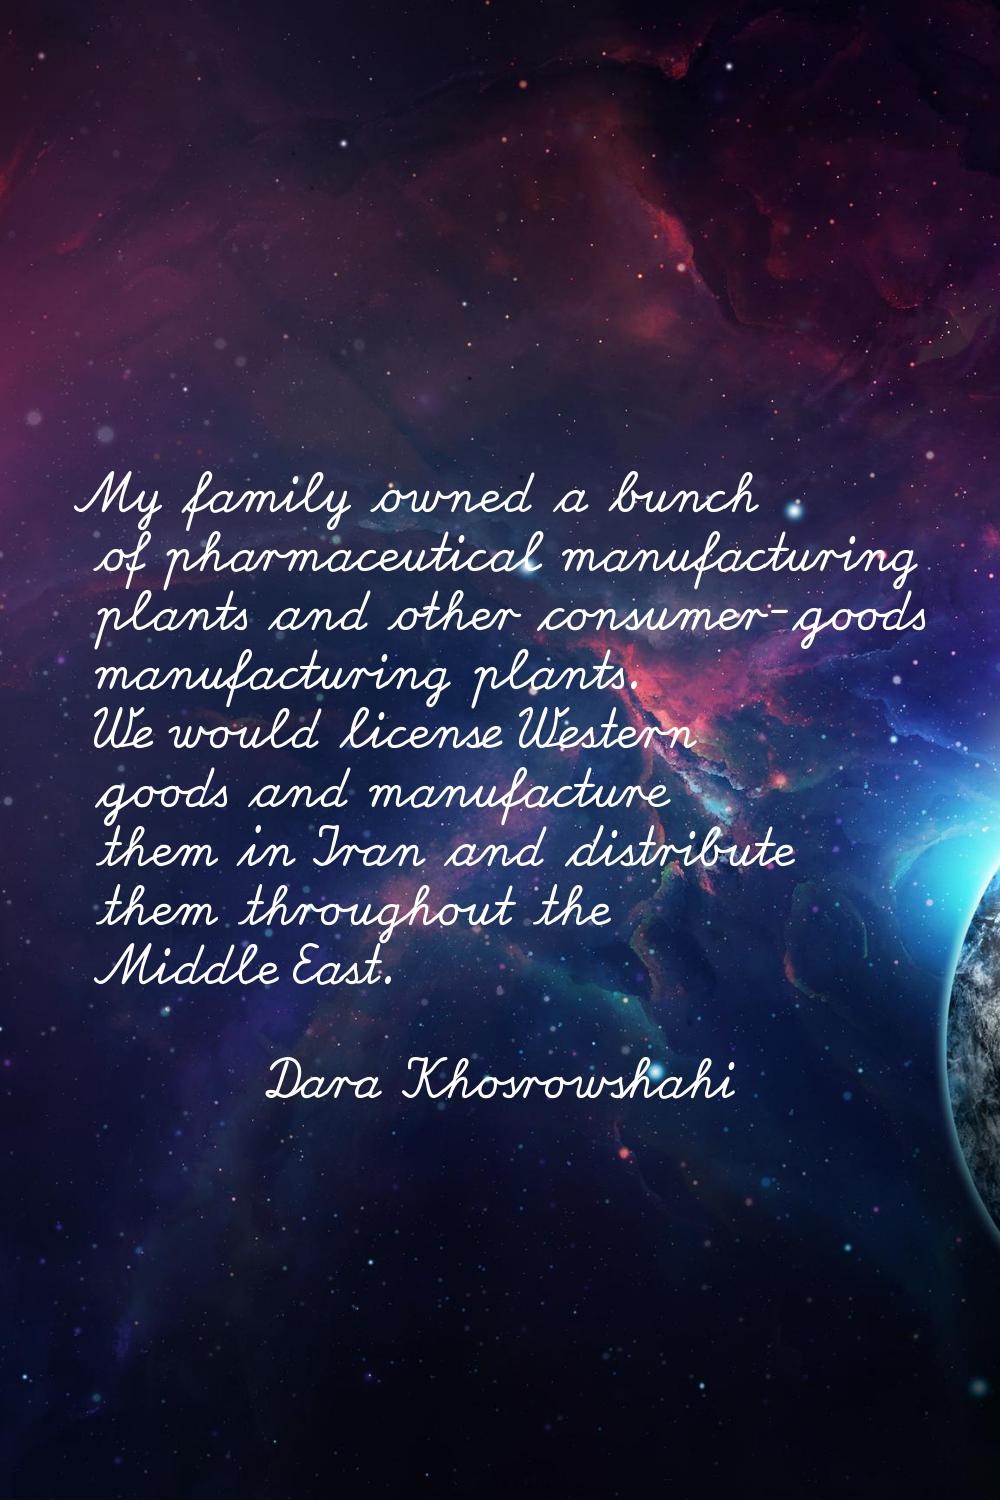 My family owned a bunch of pharmaceutical manufacturing plants and other consumer-goods manufacturi